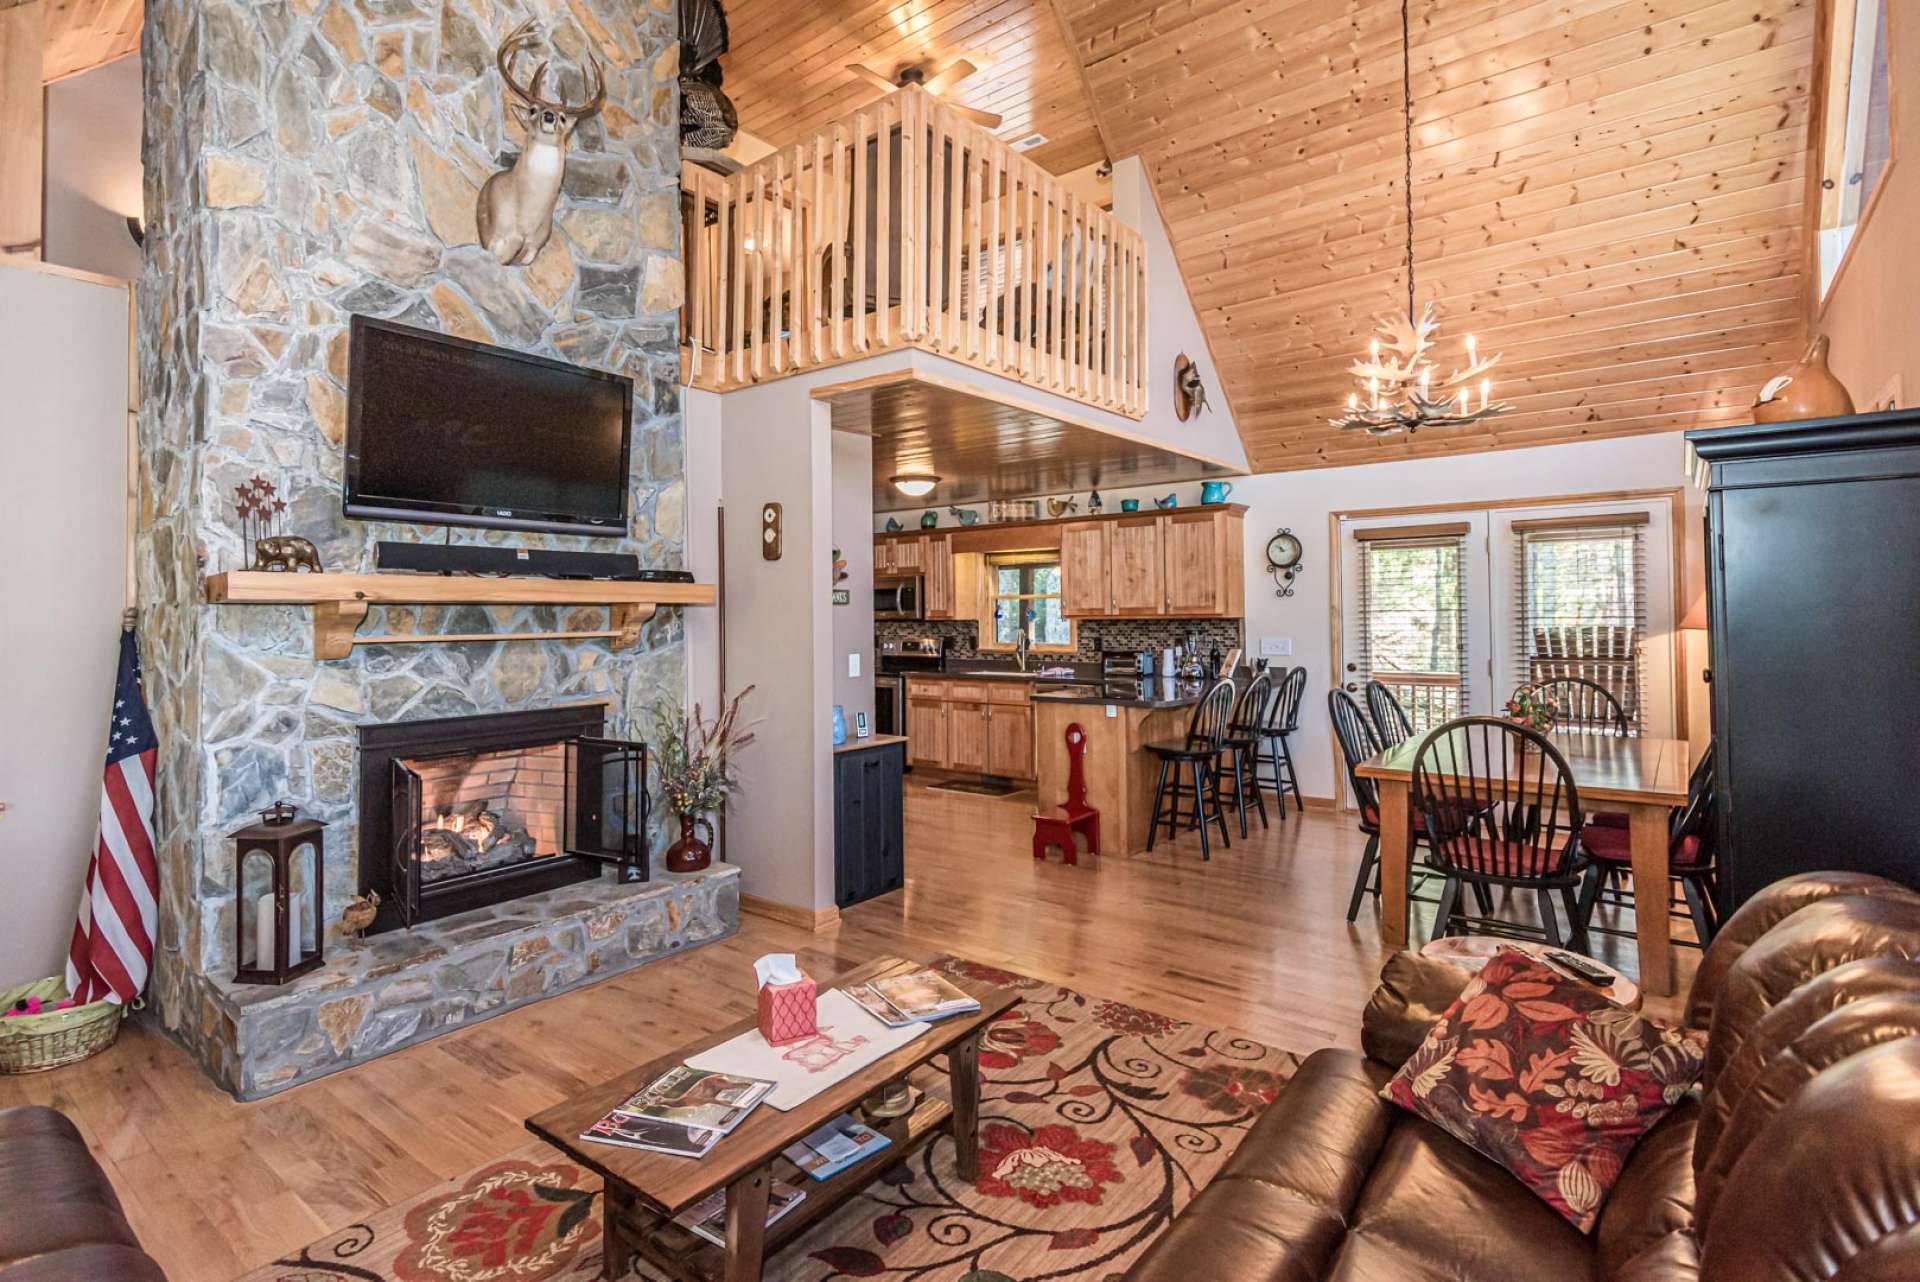 Upon entering the cabin, you immediately get that "I'm home" feeling. The great room welcomes you with a vaulted wood ceiling, a soaring stone fireplace, wood floors, and a wall of windows filling the cabin with natural light.